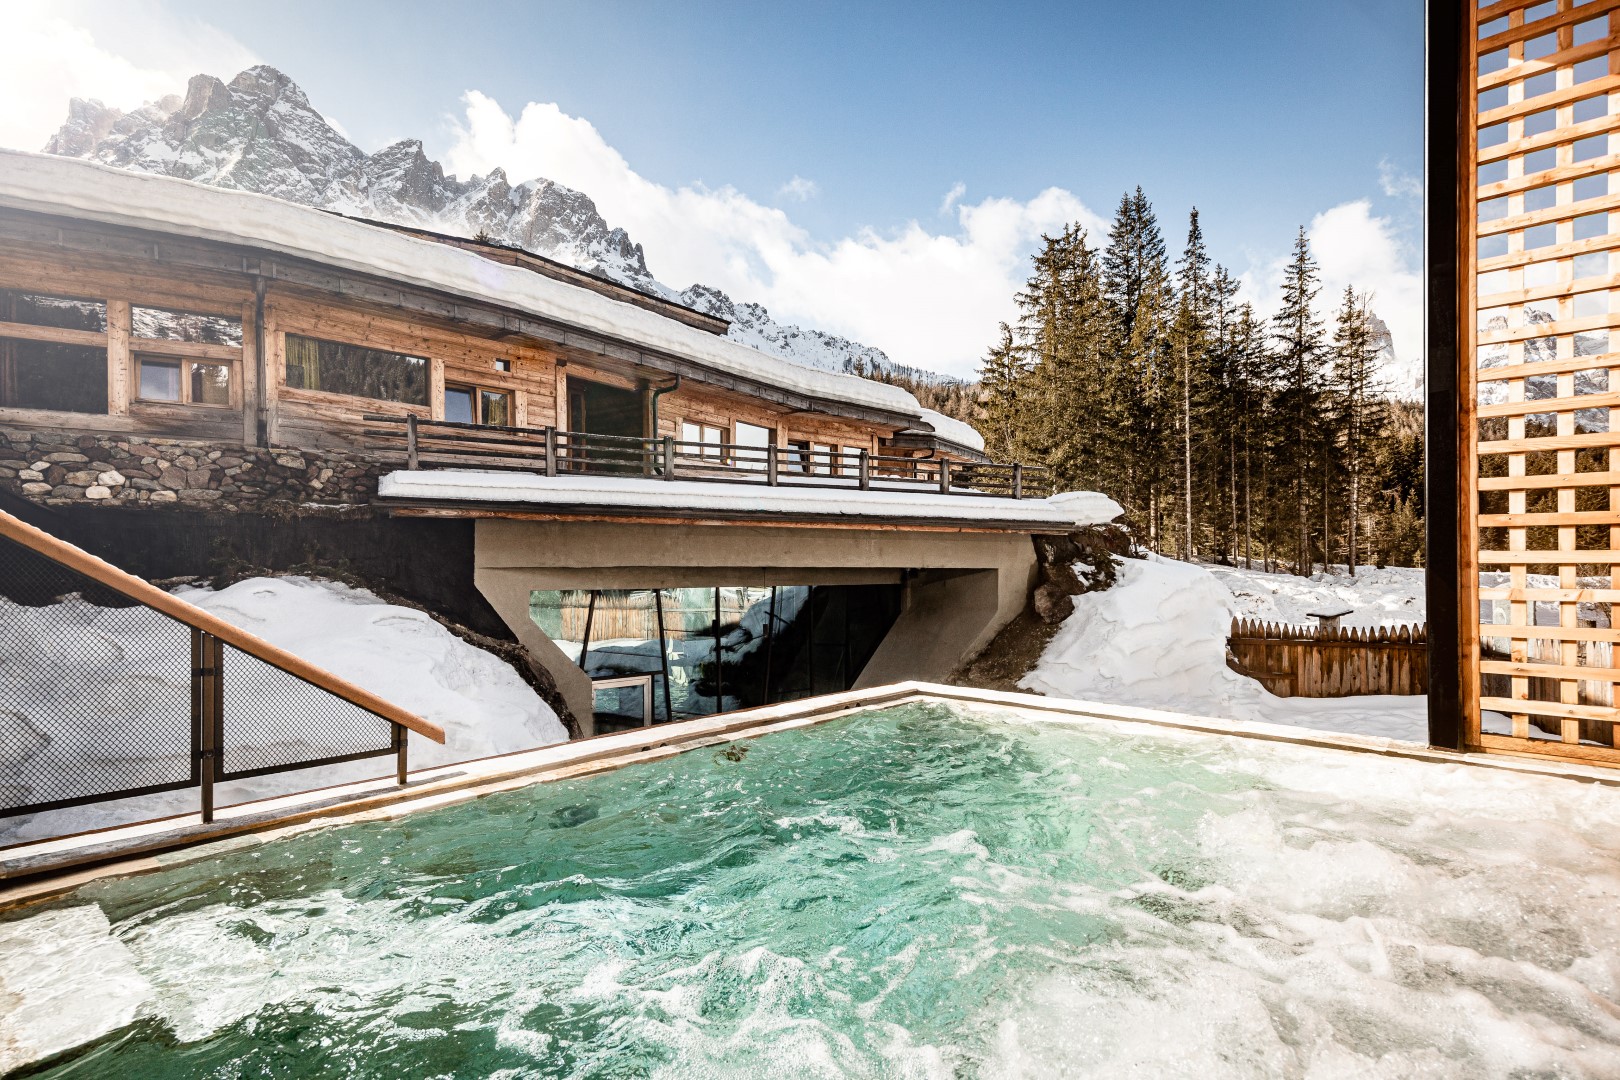 5 winter campsites with swimming pool in the Alps – main image